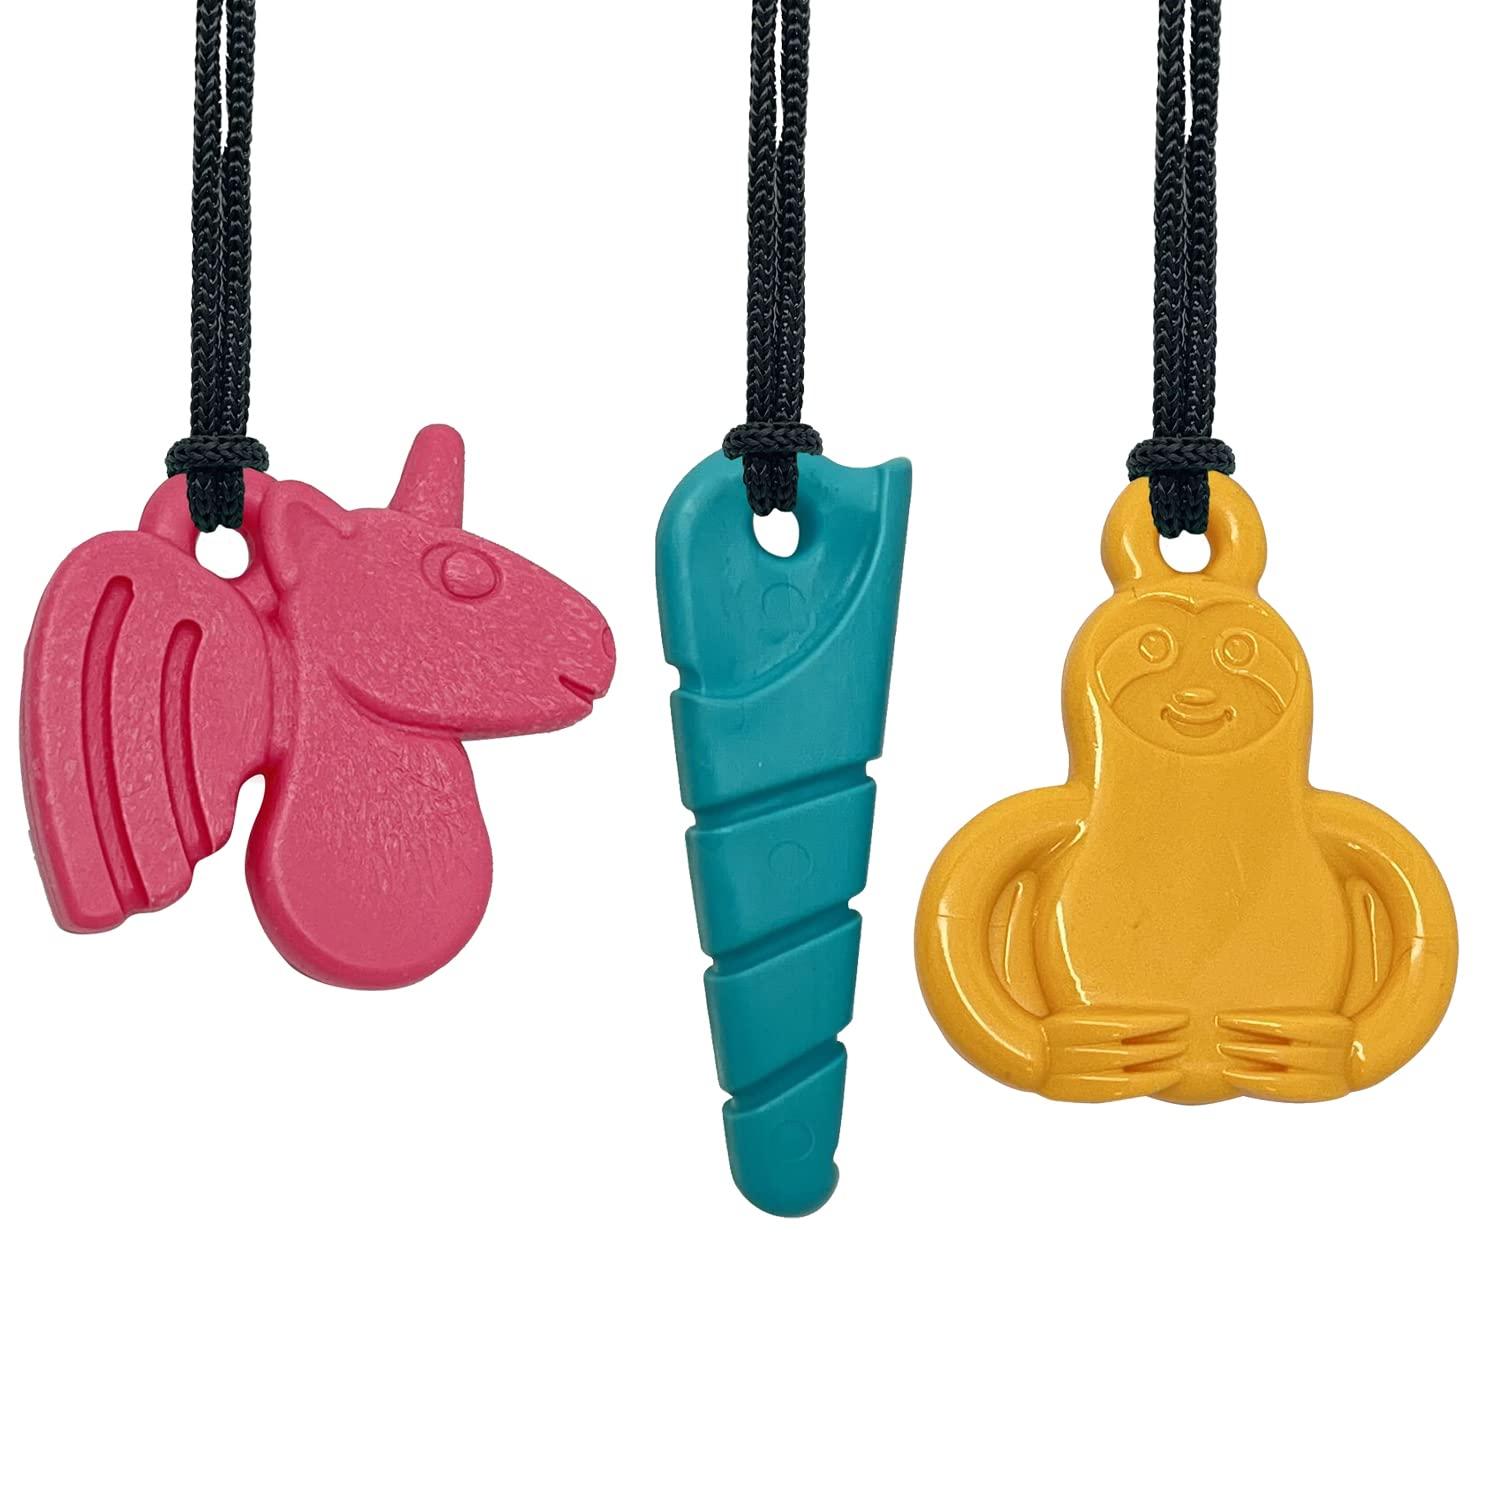 Amazon.com : Sensory Chew Necklaces for Kids Adults, Chew Toys for Kids  with Autism Anxiety ADHD SPD or Special Needs, Silicone Donut Chewy Chewing Necklace  Sensory Help to Relieve Stress : Baby